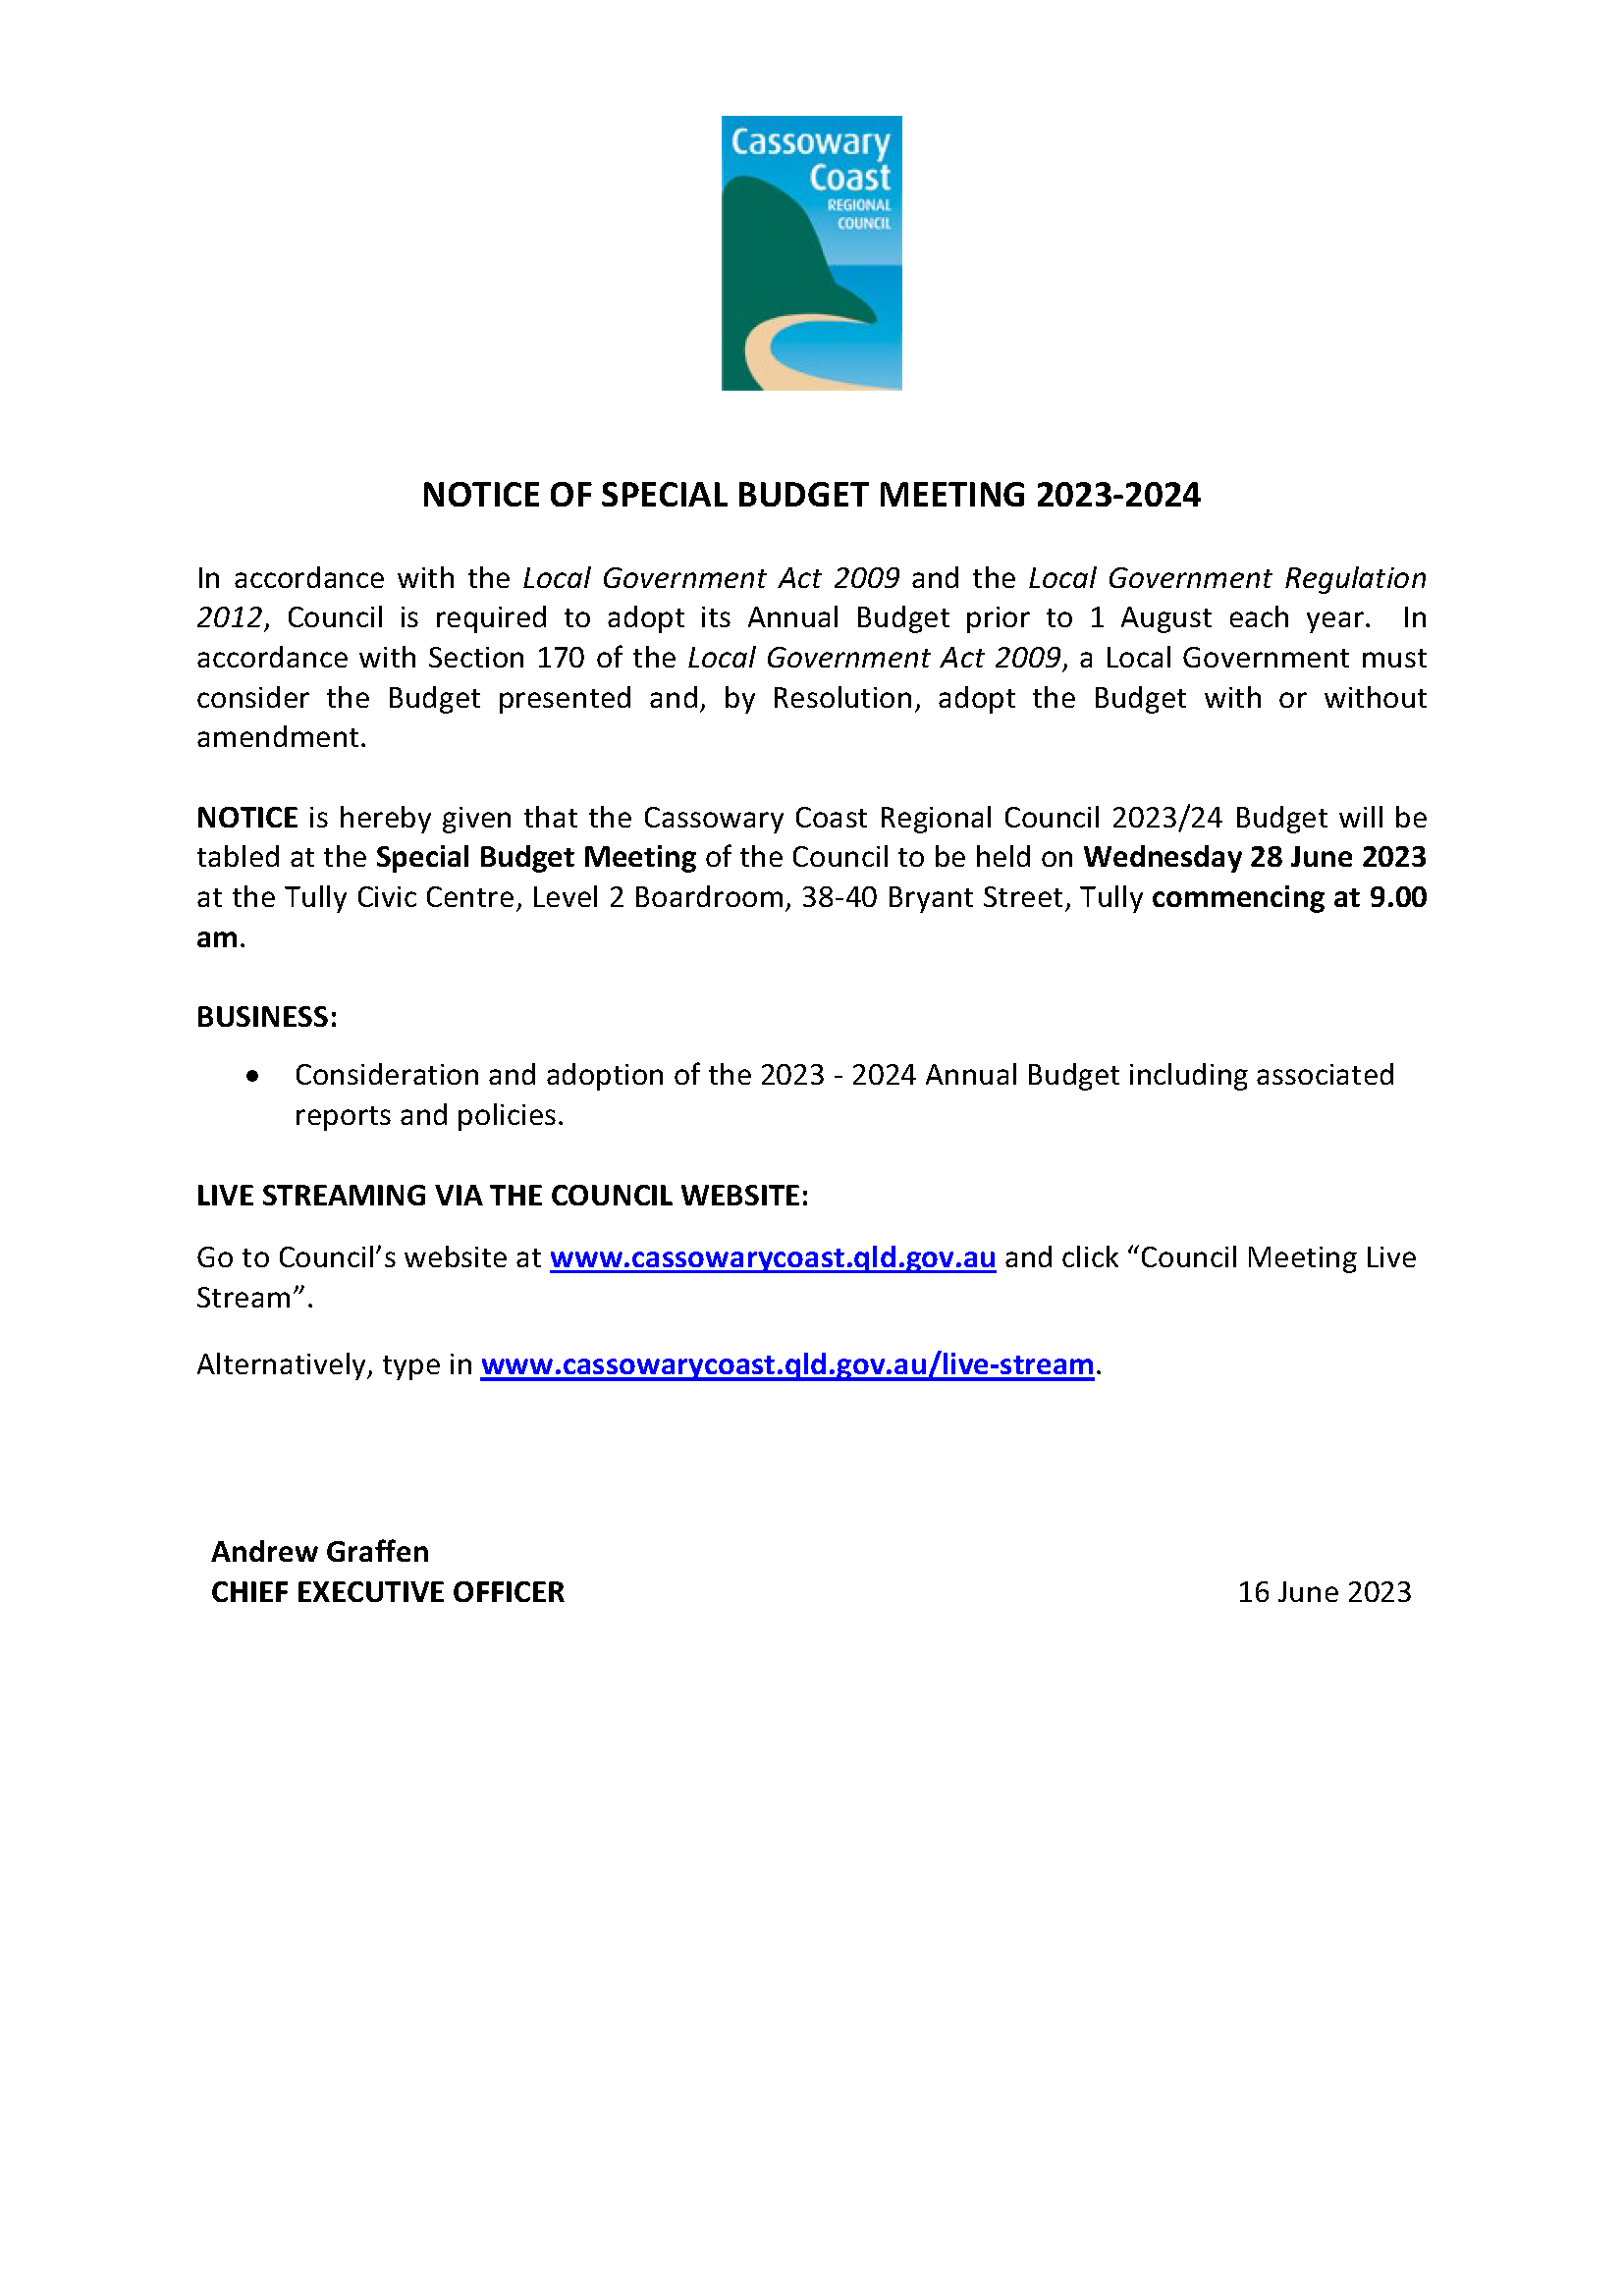 2023 06 28 Notice of special budget meeting 002